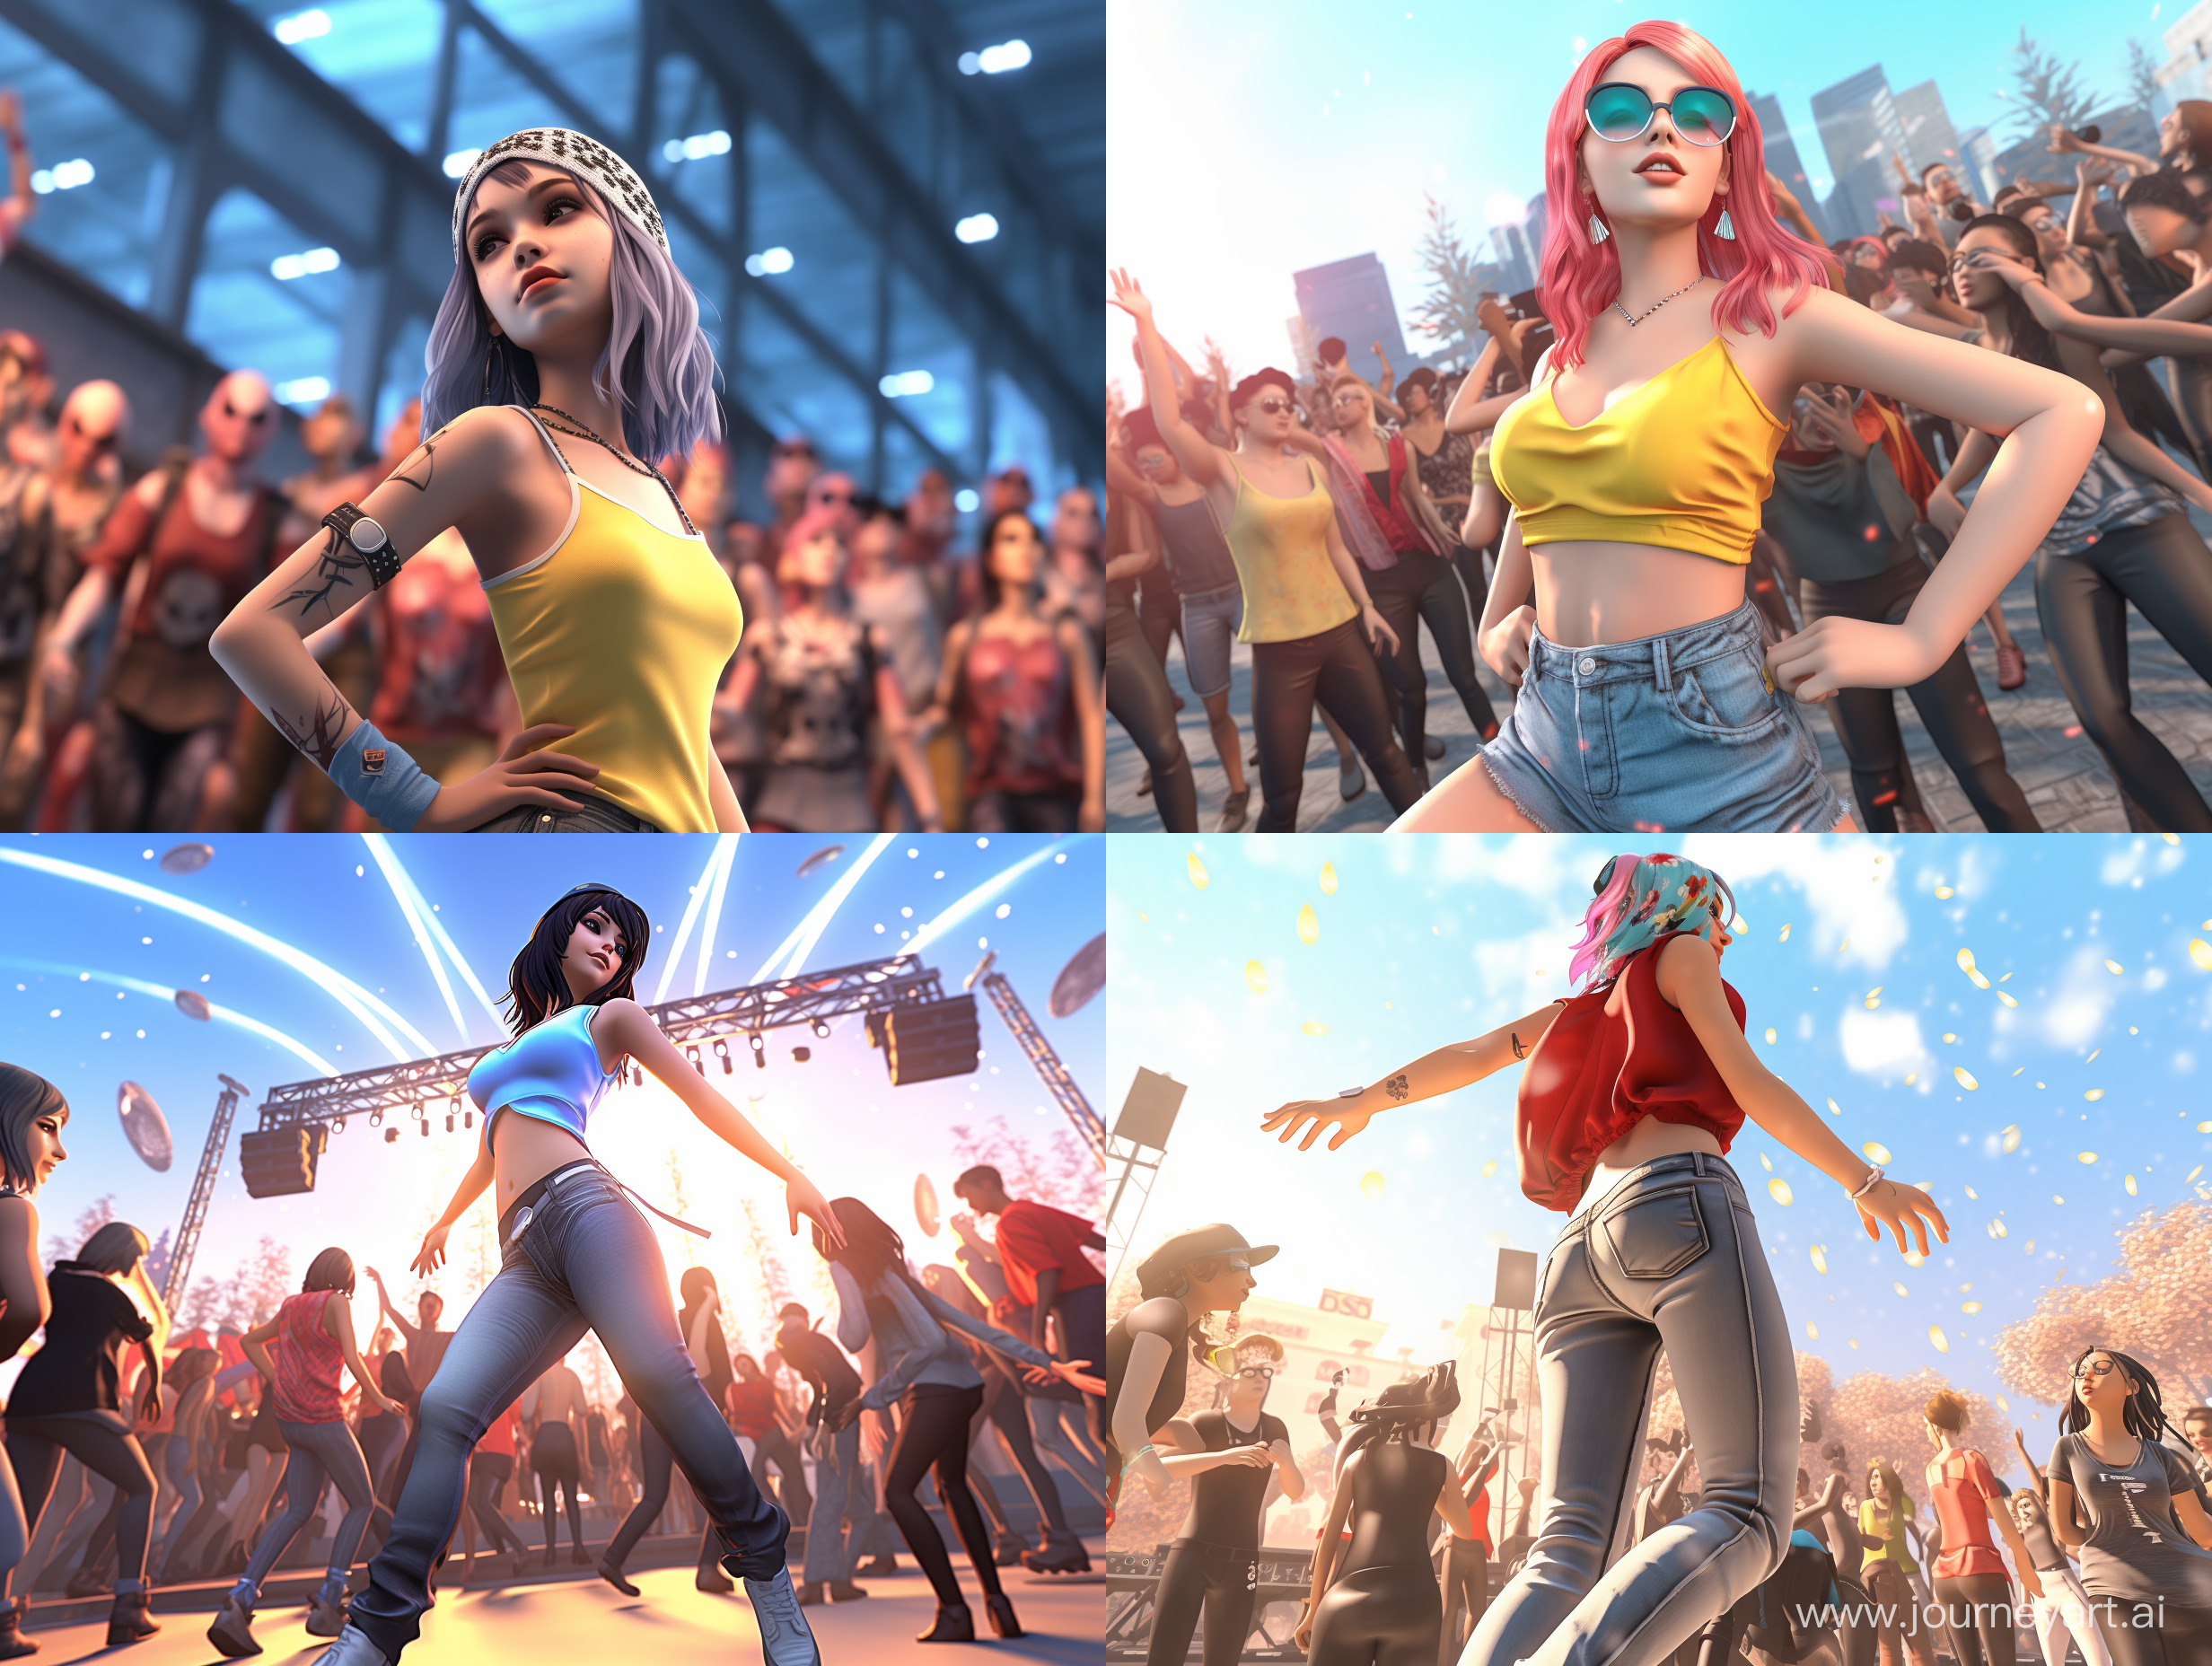 Girl character GTA 5, dancing in a place with a crowd of people, graphics style 3D GTA 5, style 3D rendering